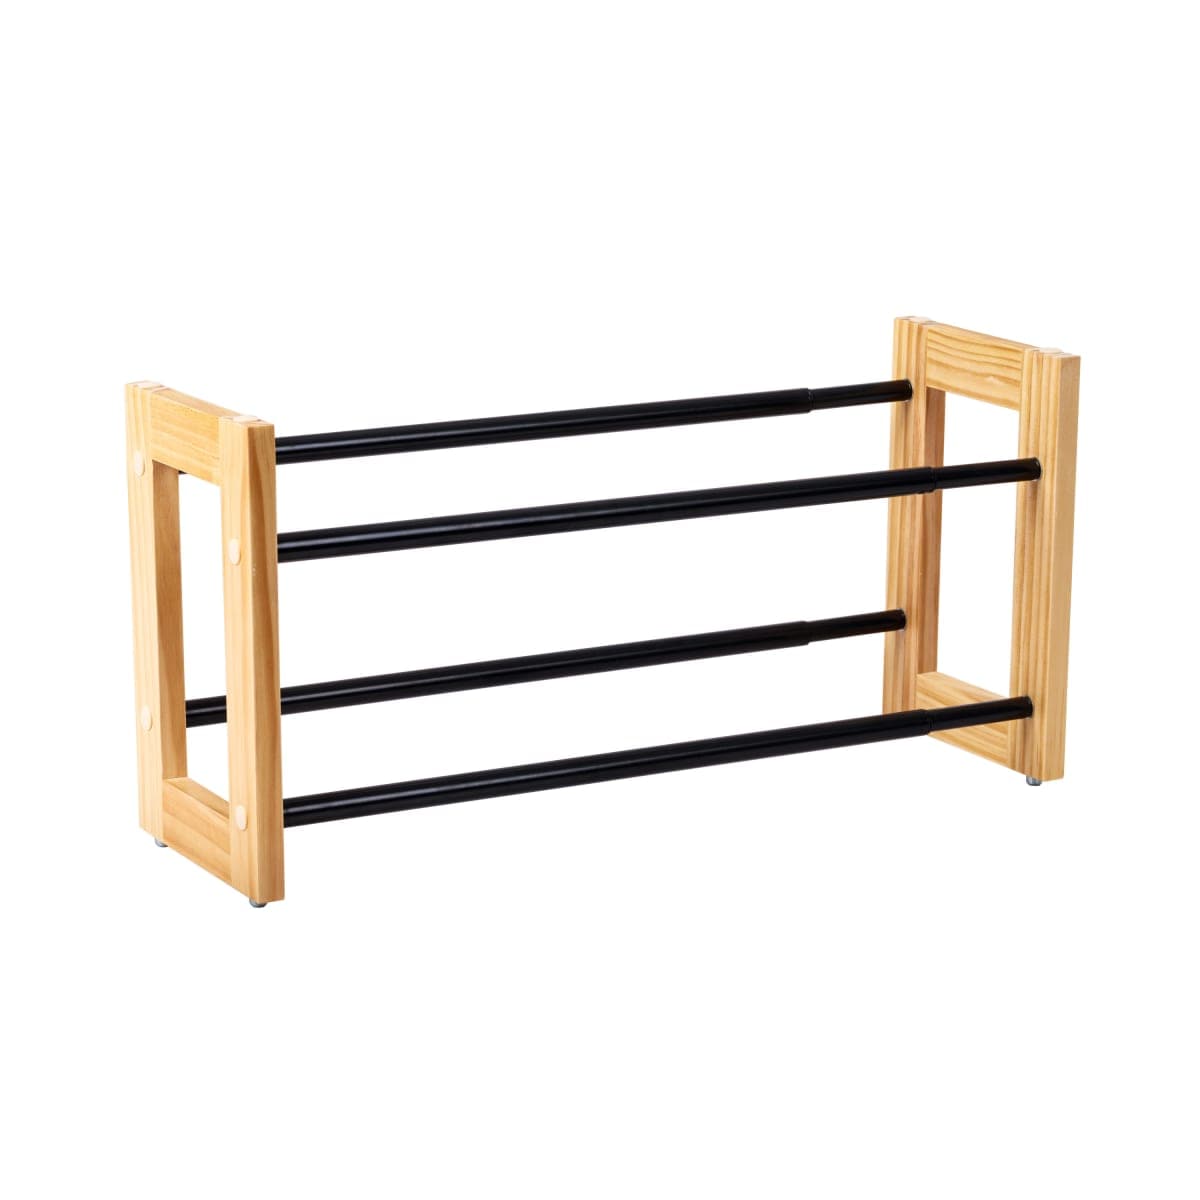 FLACKY EXTENDABLE AND STACKABLE WOODEN METAL SHOE SHELF SPACEO